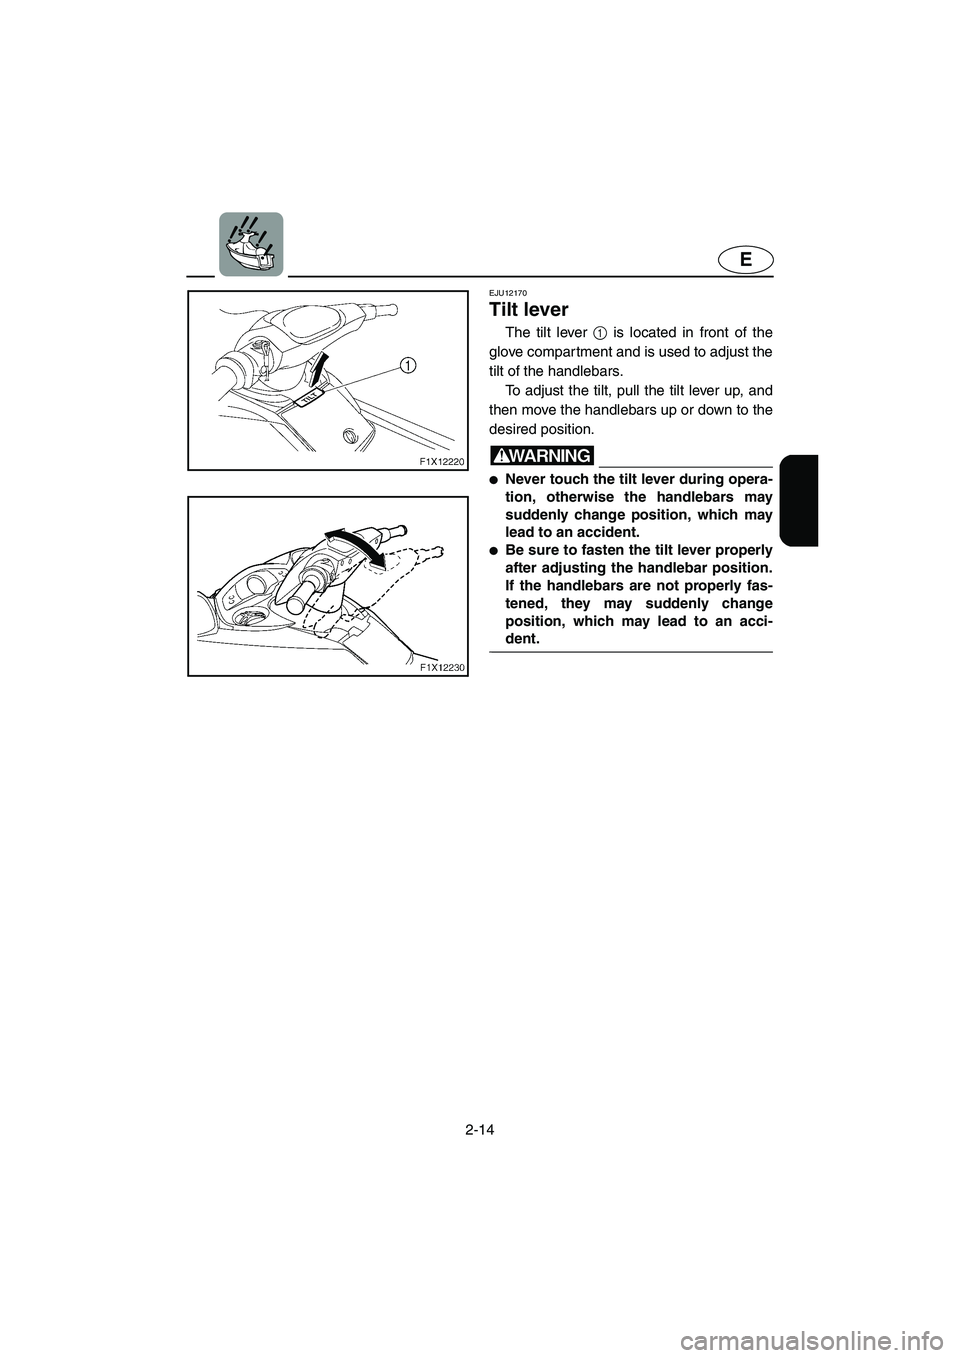 YAMAHA FX HO 2006 Service Manual 2-14
E
EJU12170 
Tilt lever  
The tilt lever 1 is located in front of the
glove compartment and is used to adjust the
tilt of the handlebars. 
To adjust the tilt, pull the tilt lever up, and
then move